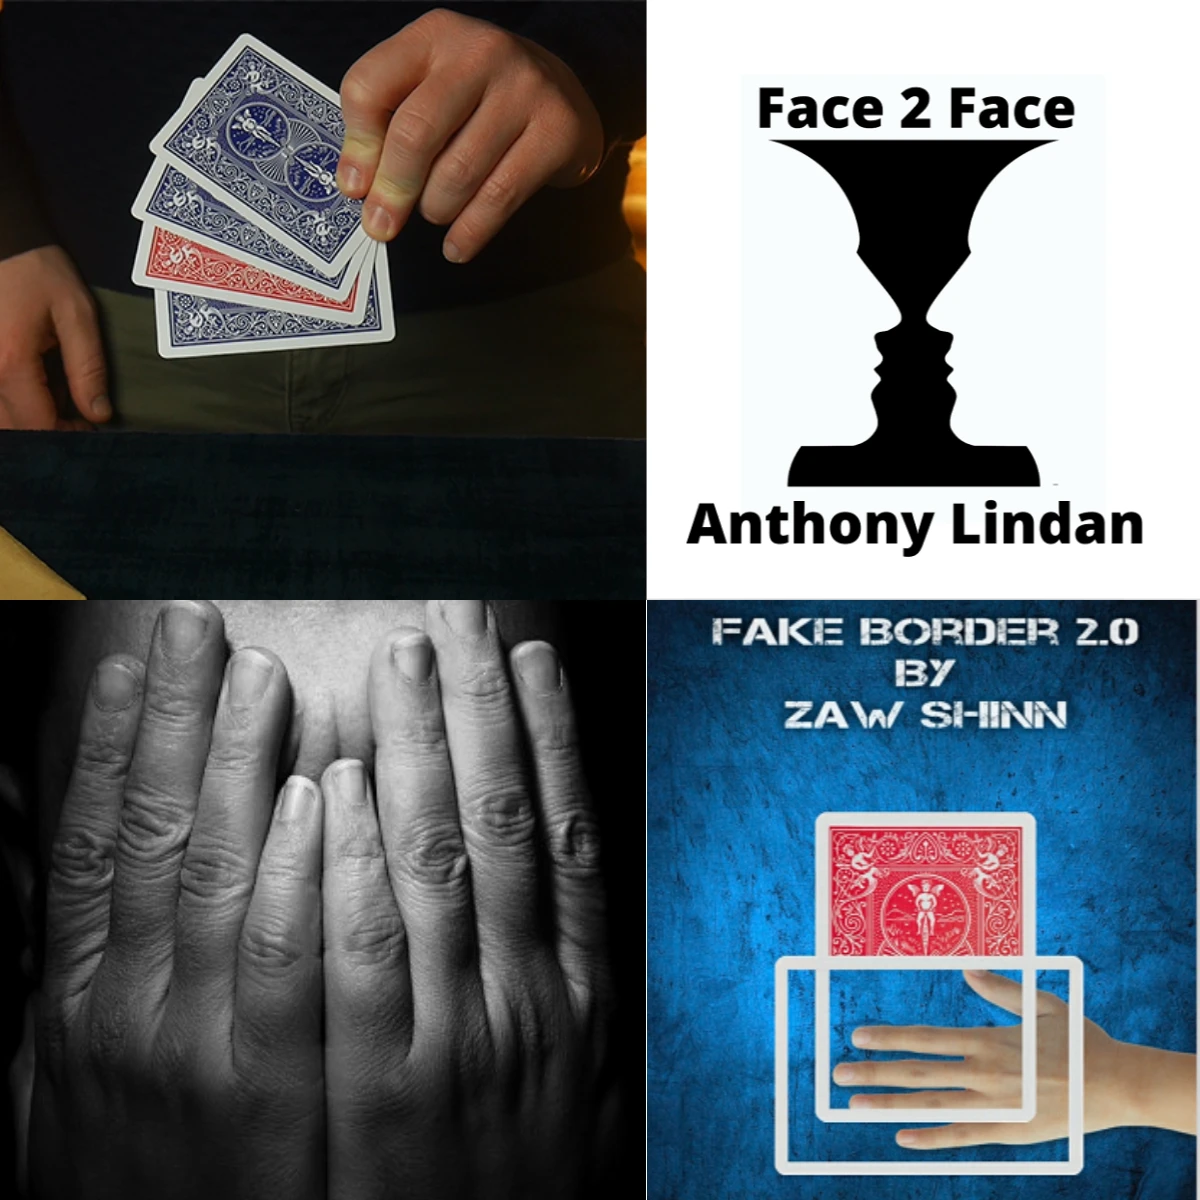 

Eruption by Jordan Victoria，Face 2 Face by Anthony Lindan，Face Value by Benjamin Earl，Fake Border 2.0 by Zaw Shinn Magic tricks